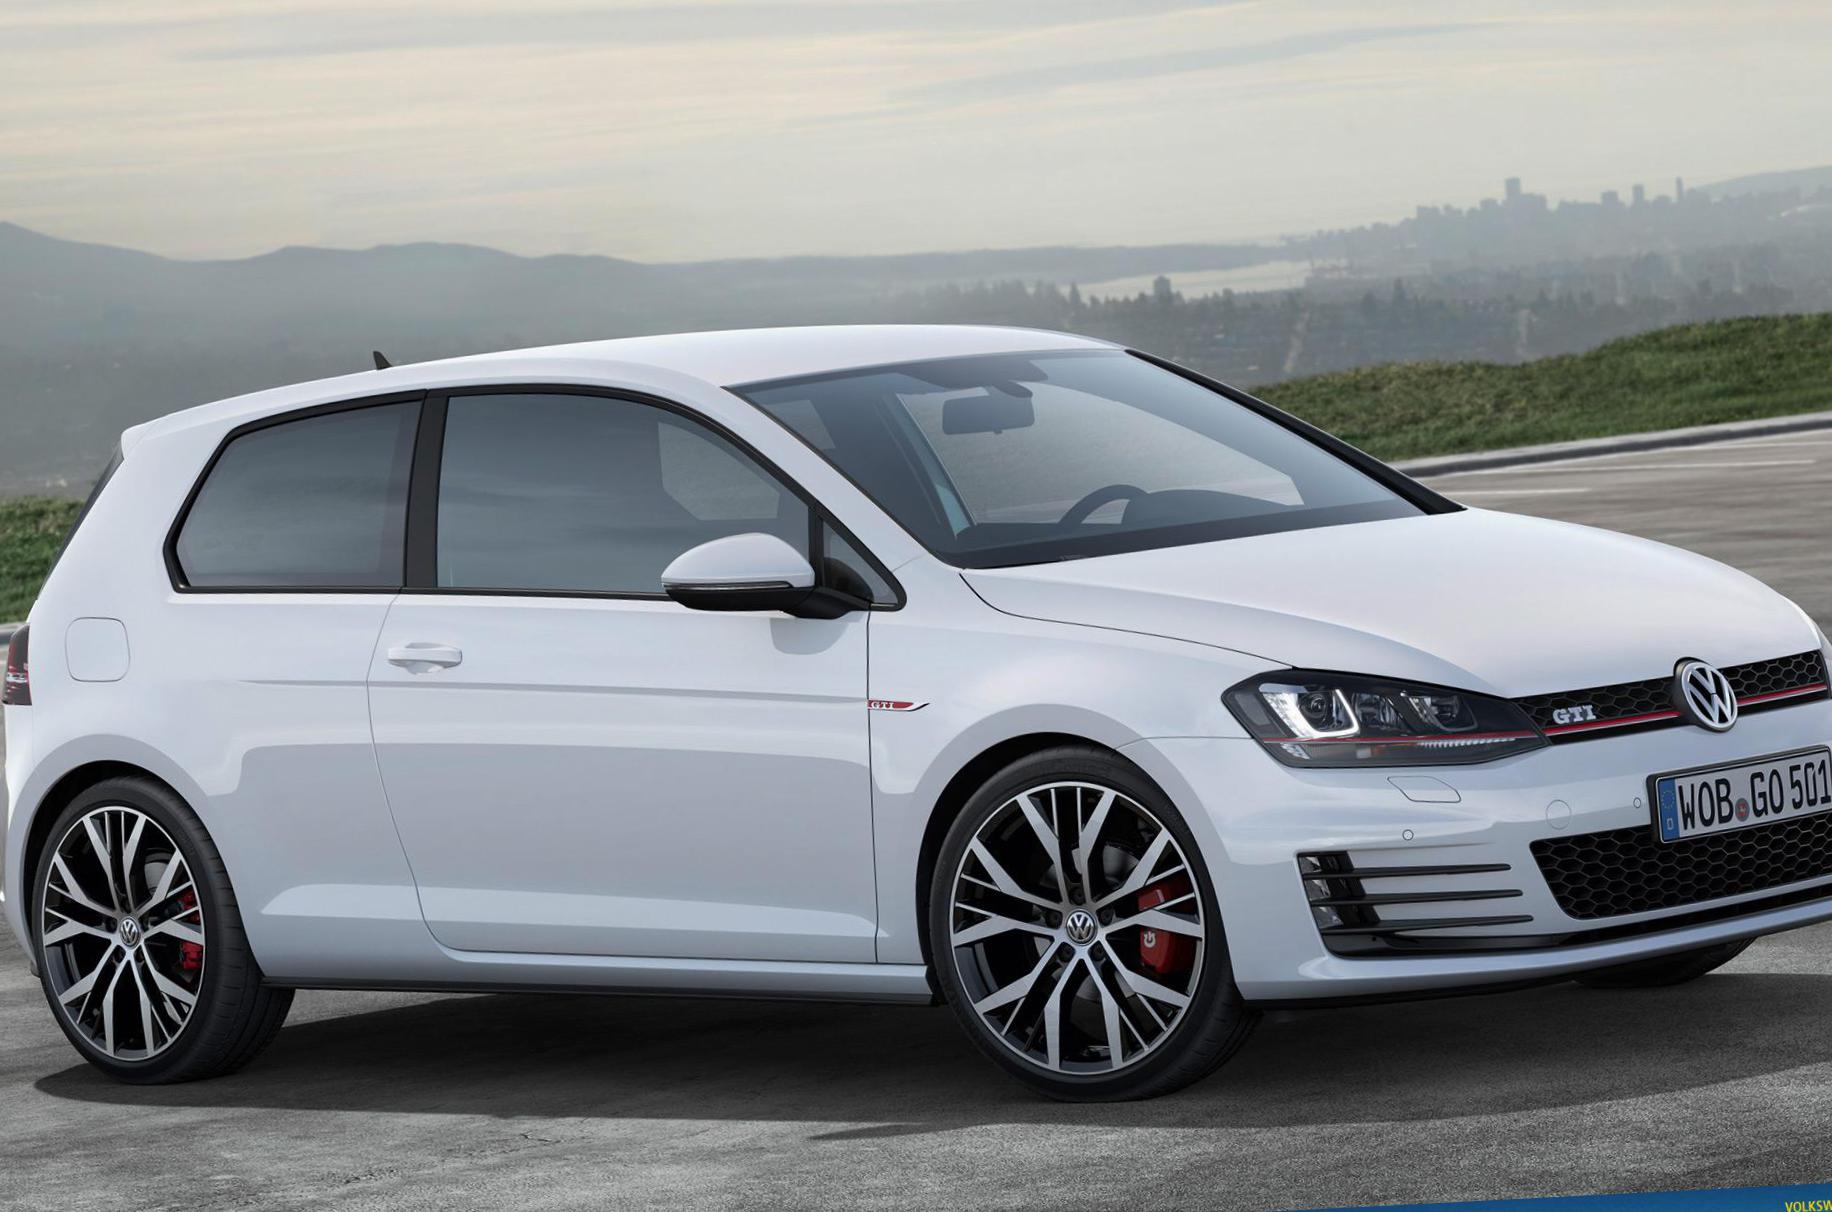 Golf GTI Volkswagen price coupe